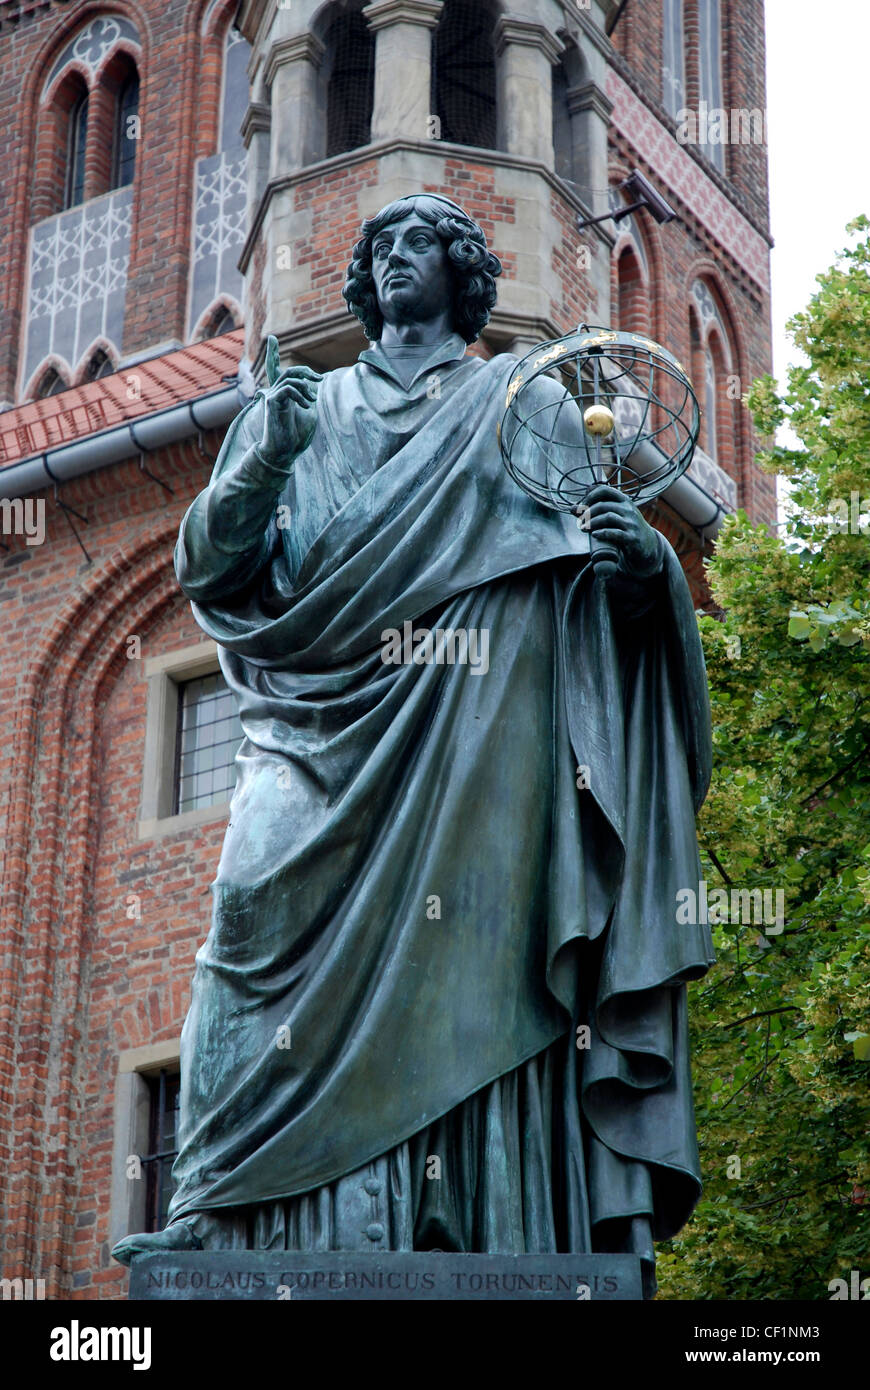 Monument to the astronomer Nicolaus Copernicus in front of the old city hall of the Polish city of Torun. Stock Photo